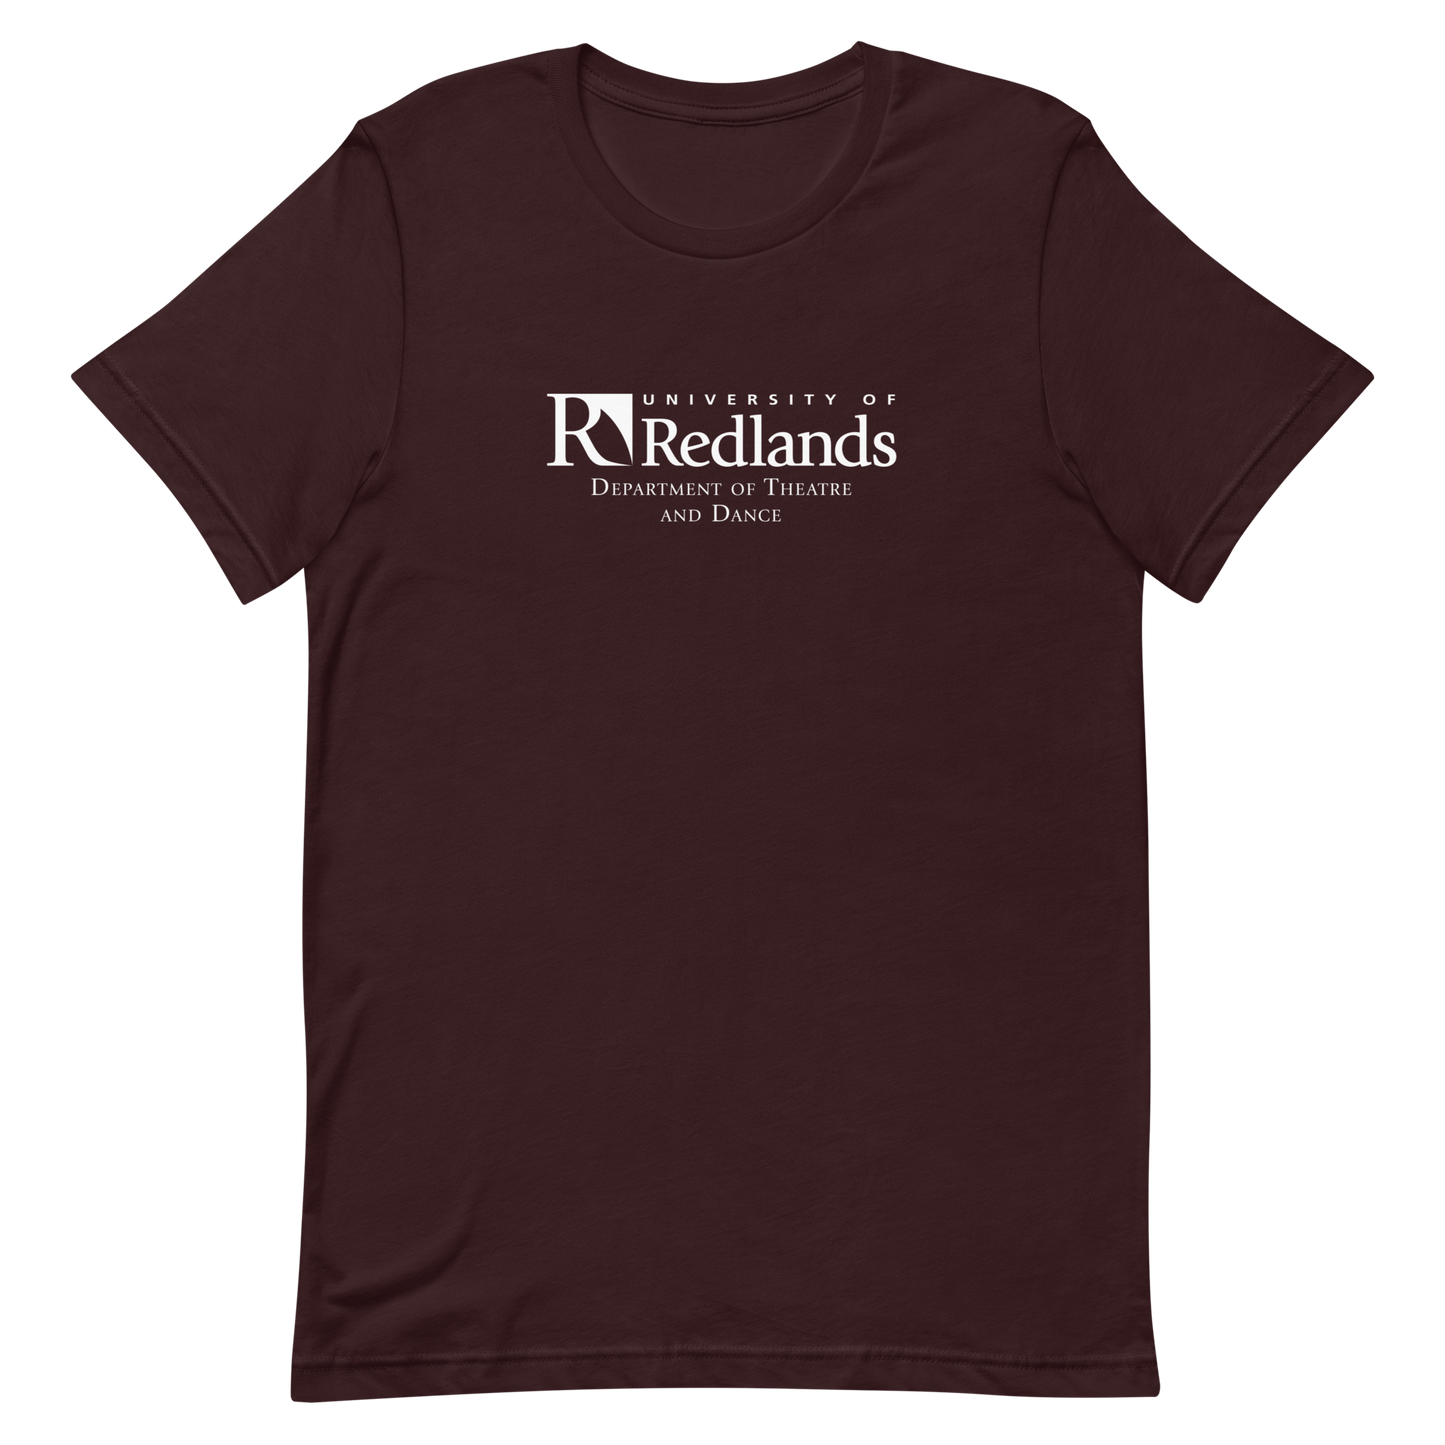 Redlands Department of Theatre and Dance Unisex t-shirt